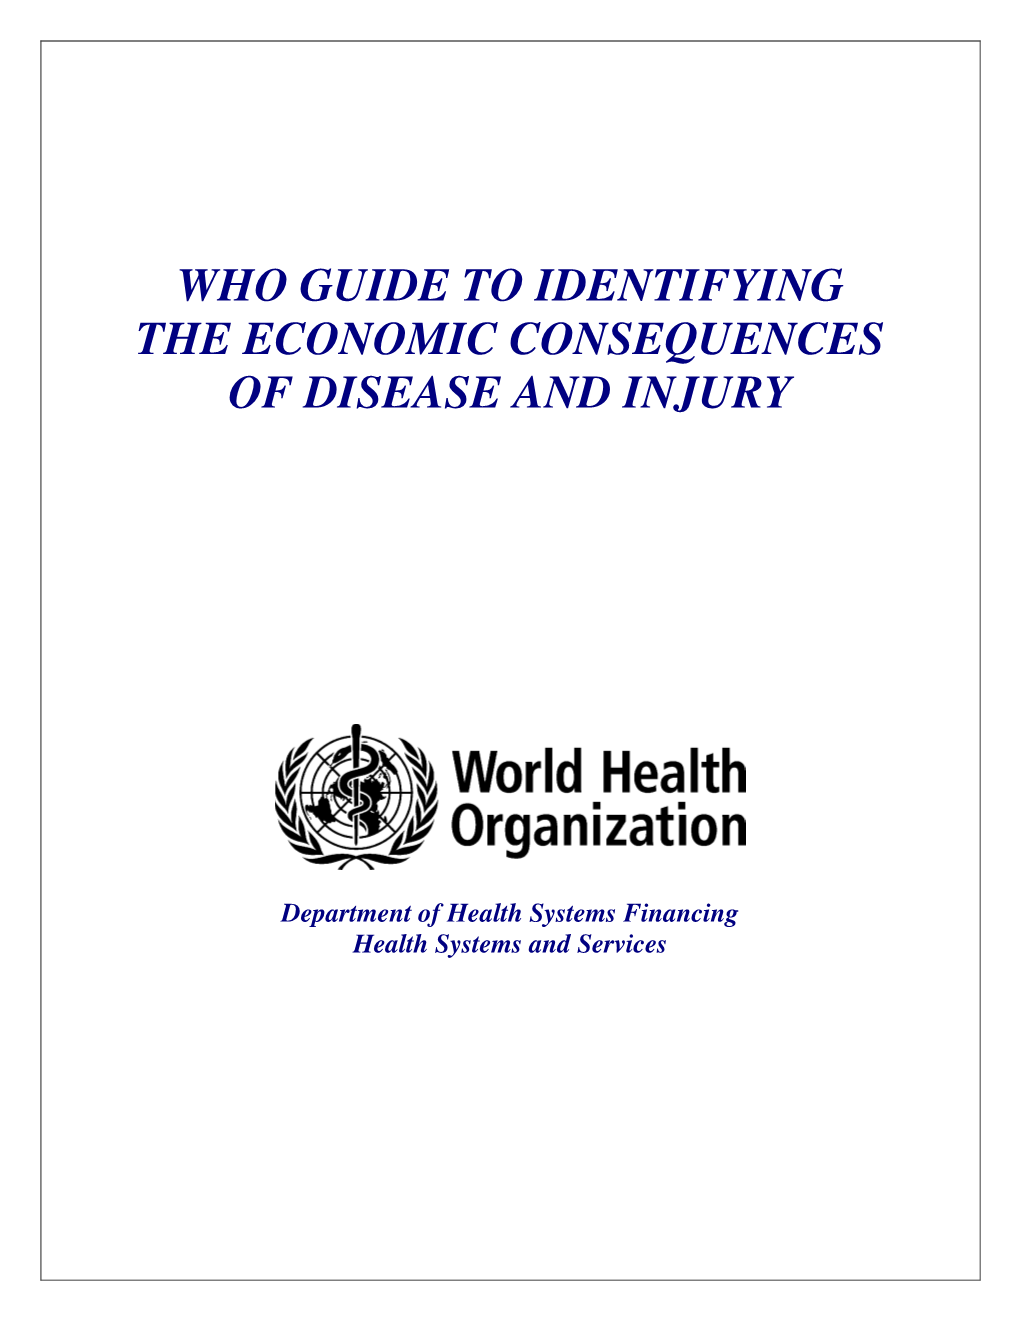 Who Guide to Identifying the Economic Consequences of Disease and Injury